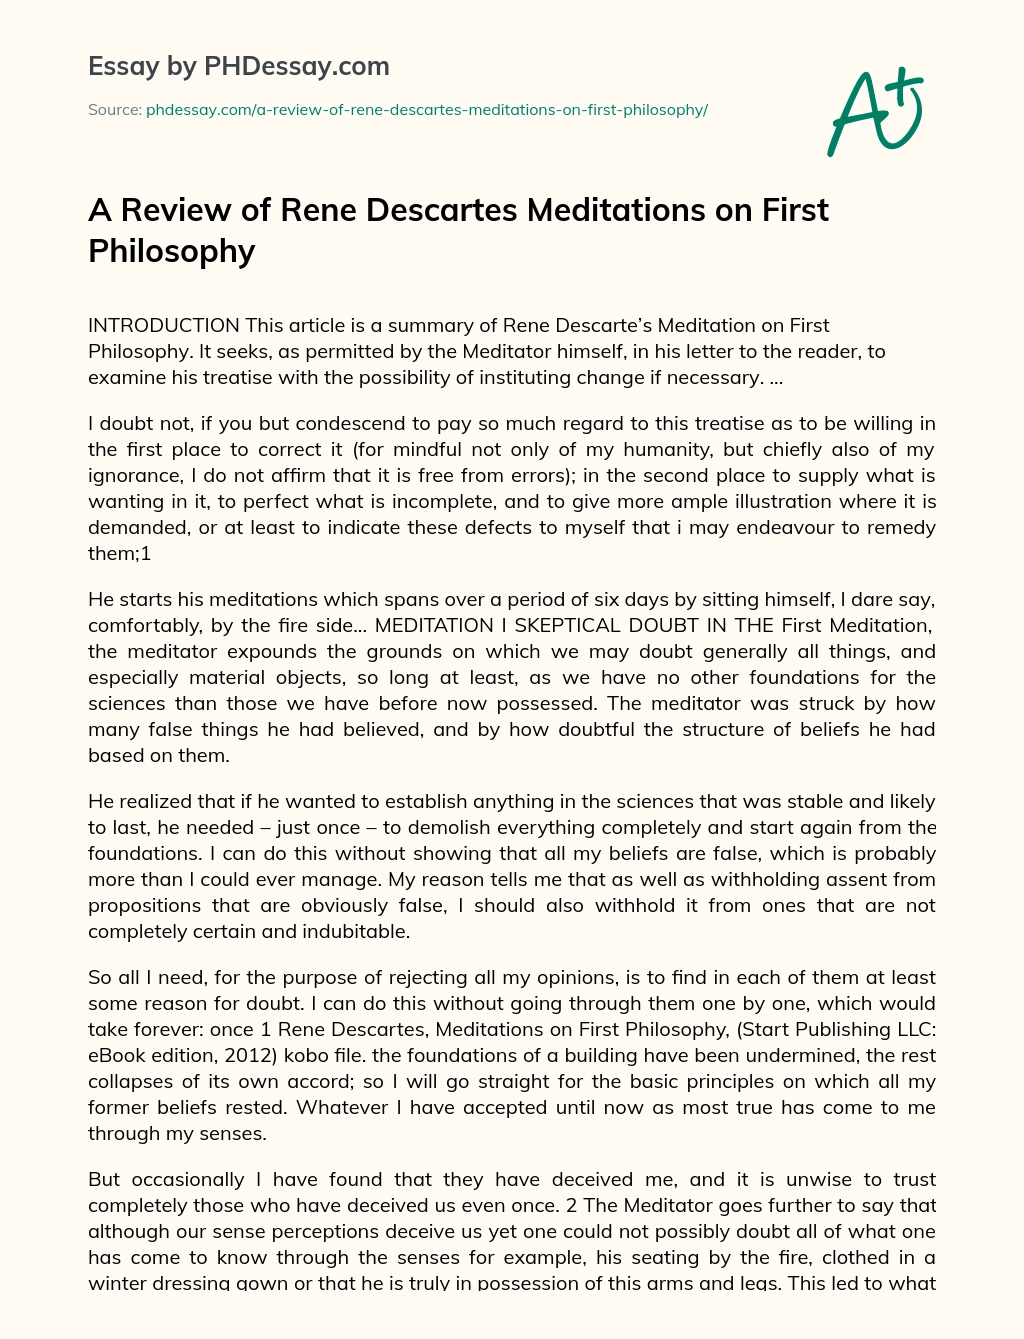 A Review of Rene Descartes Meditations on First Philosophy essay